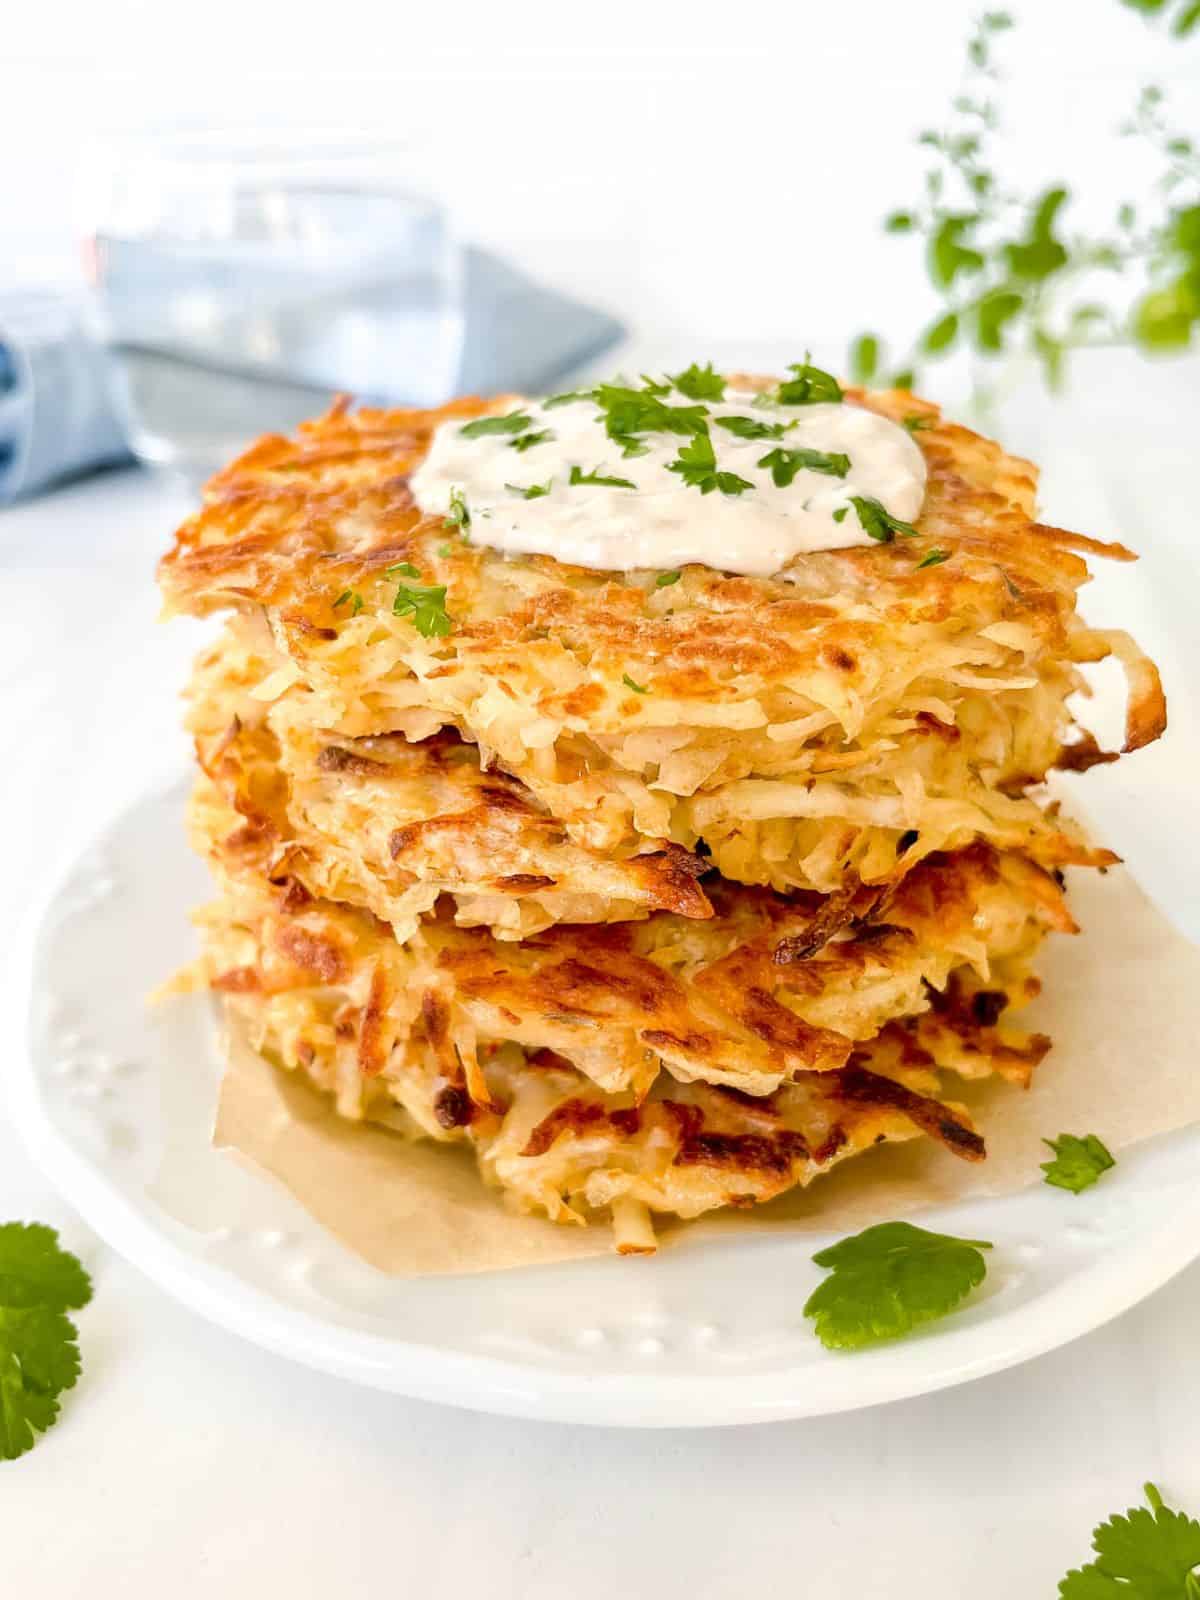 grated potato fritters in a stack on a white plate next to herbs and a glass of water.